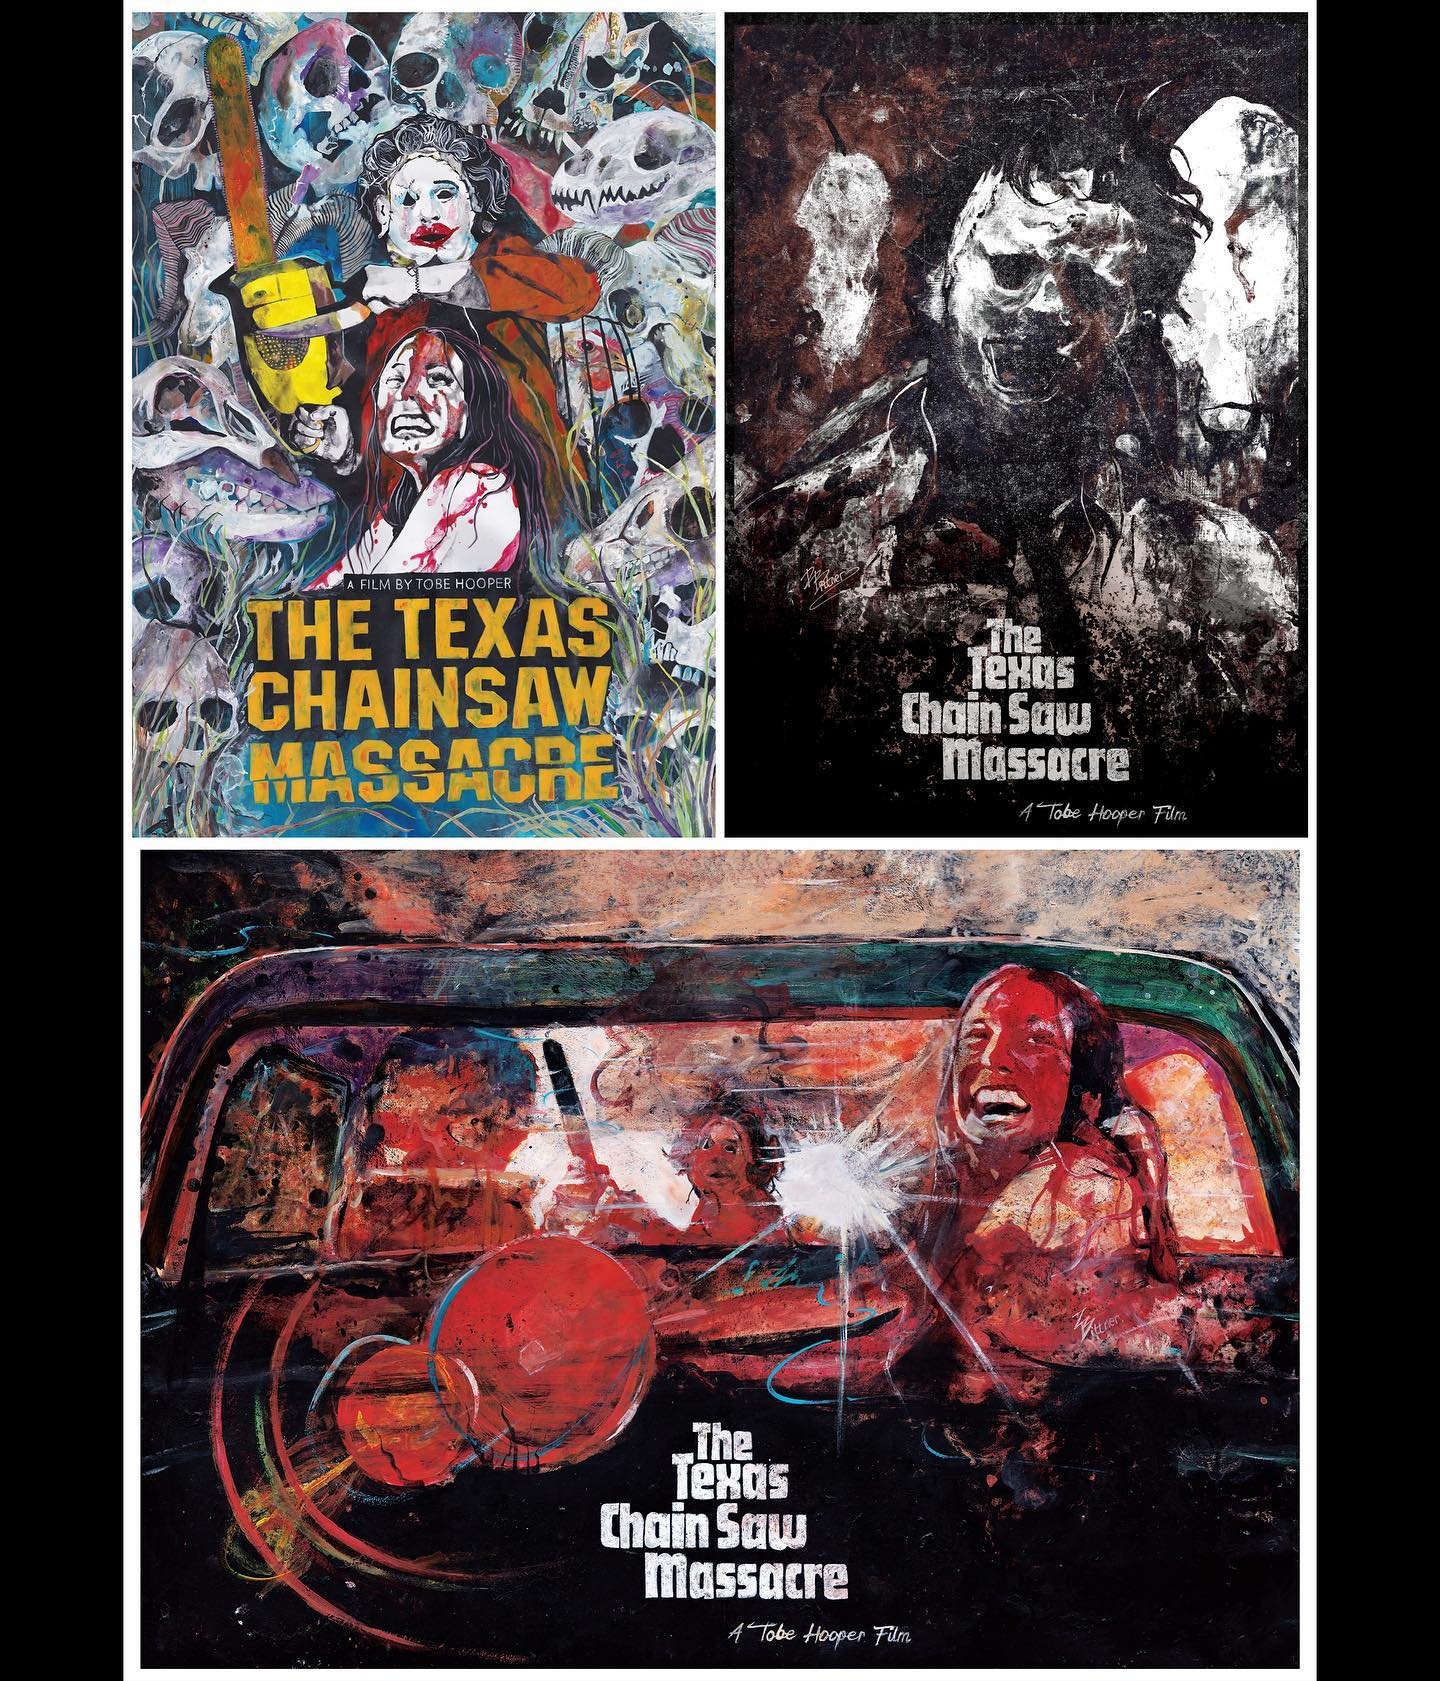 Three posters I&rsquo;ve made for the original Texas Chainsaw Massacre movie. I&rsquo;ll never get bored of watching this film and making art for it. 💀💀

#thetexaschainsawmassacre #texaschainsawmassacre #leatherface #horror #horrorart #horrorartist